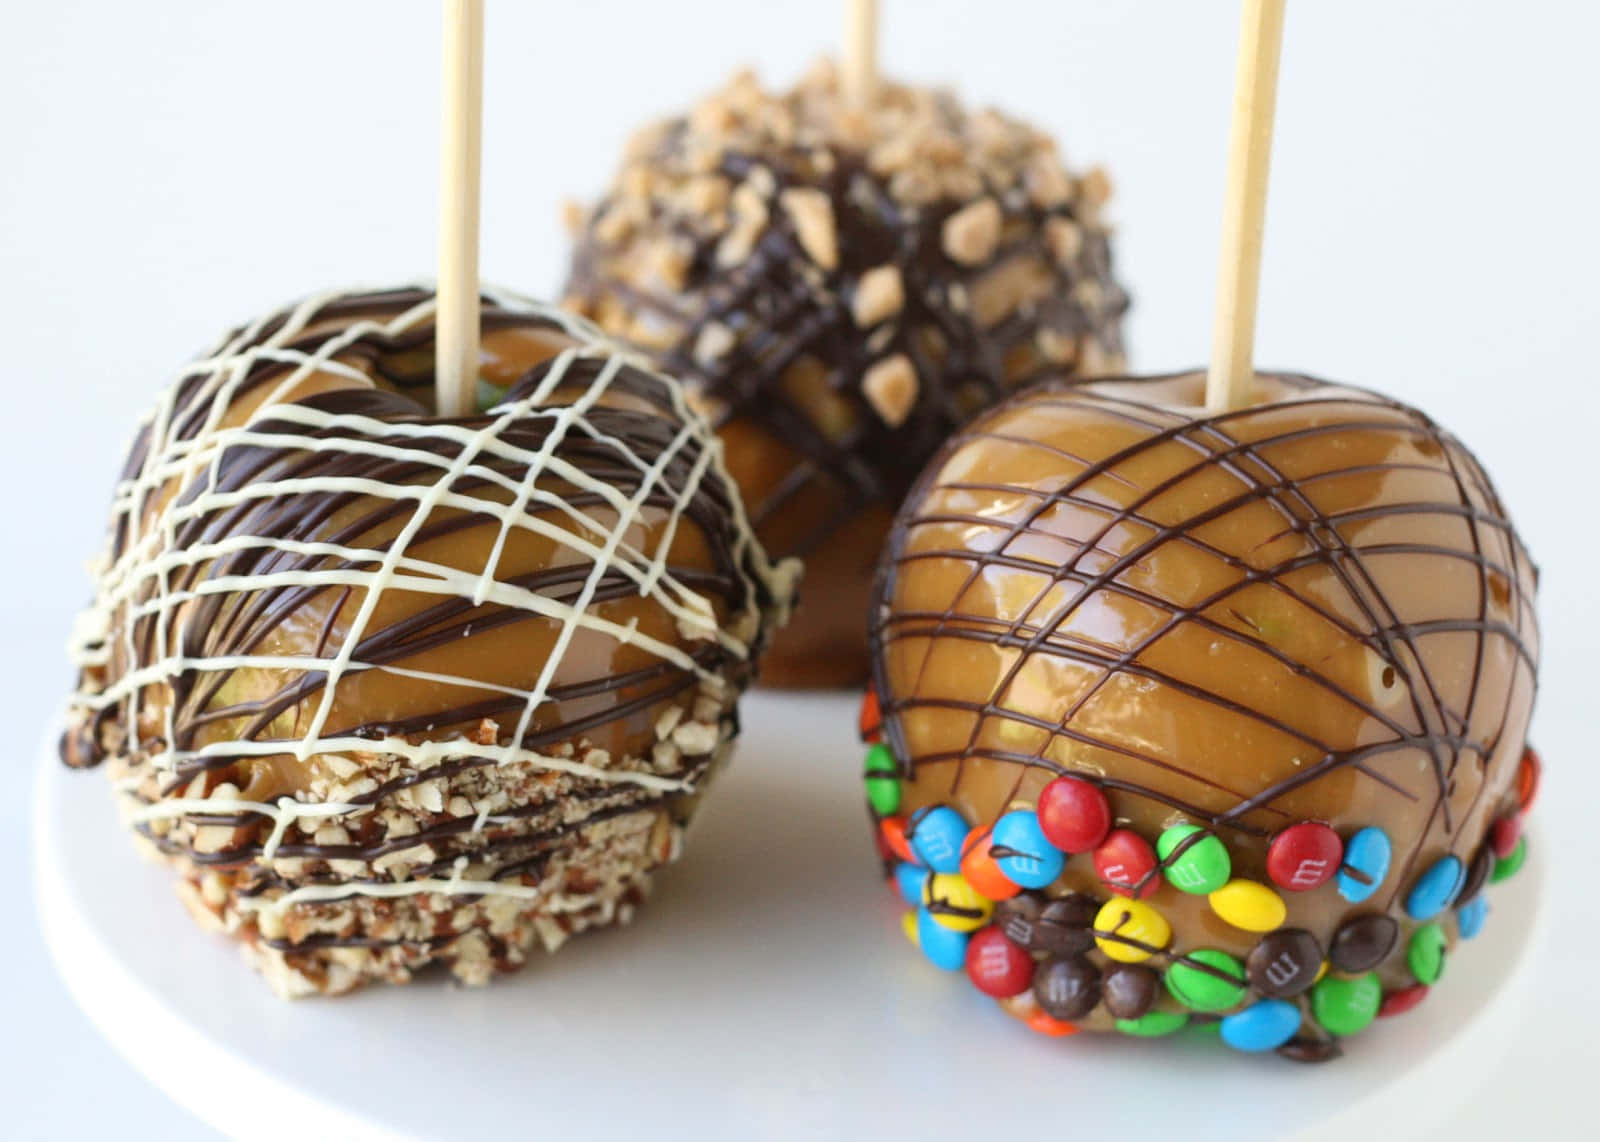 Delicious homemade caramel apples with nuts and chocolate drizzle Wallpaper